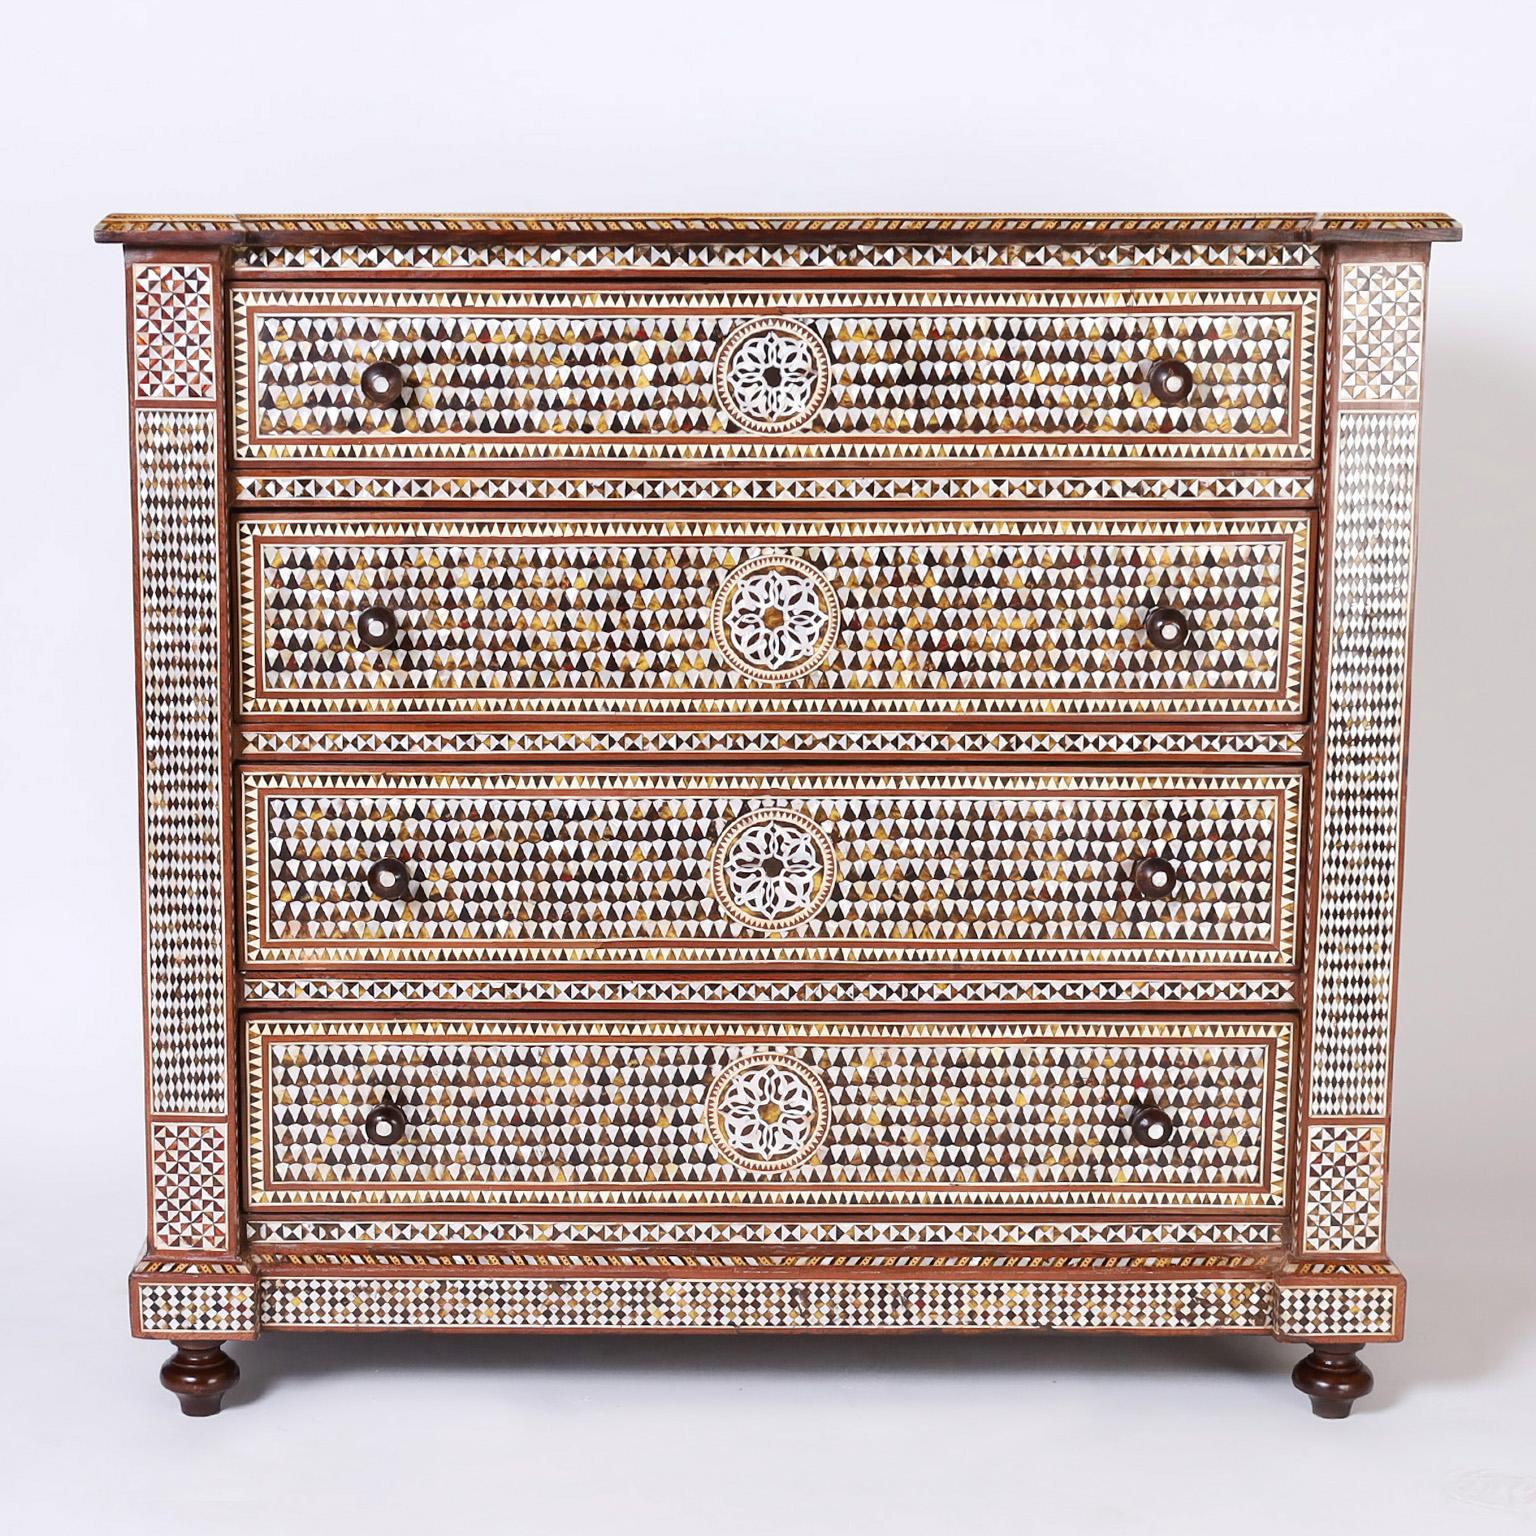 Moroccan four drawer chest fit for a king, crafted in mahogany with a floral inlaid cartouche on the top and sides inside a field of mother of pearl, indigenous hardwoods and bone marquetry with multiple inlaid borders. The drawer fronts have center